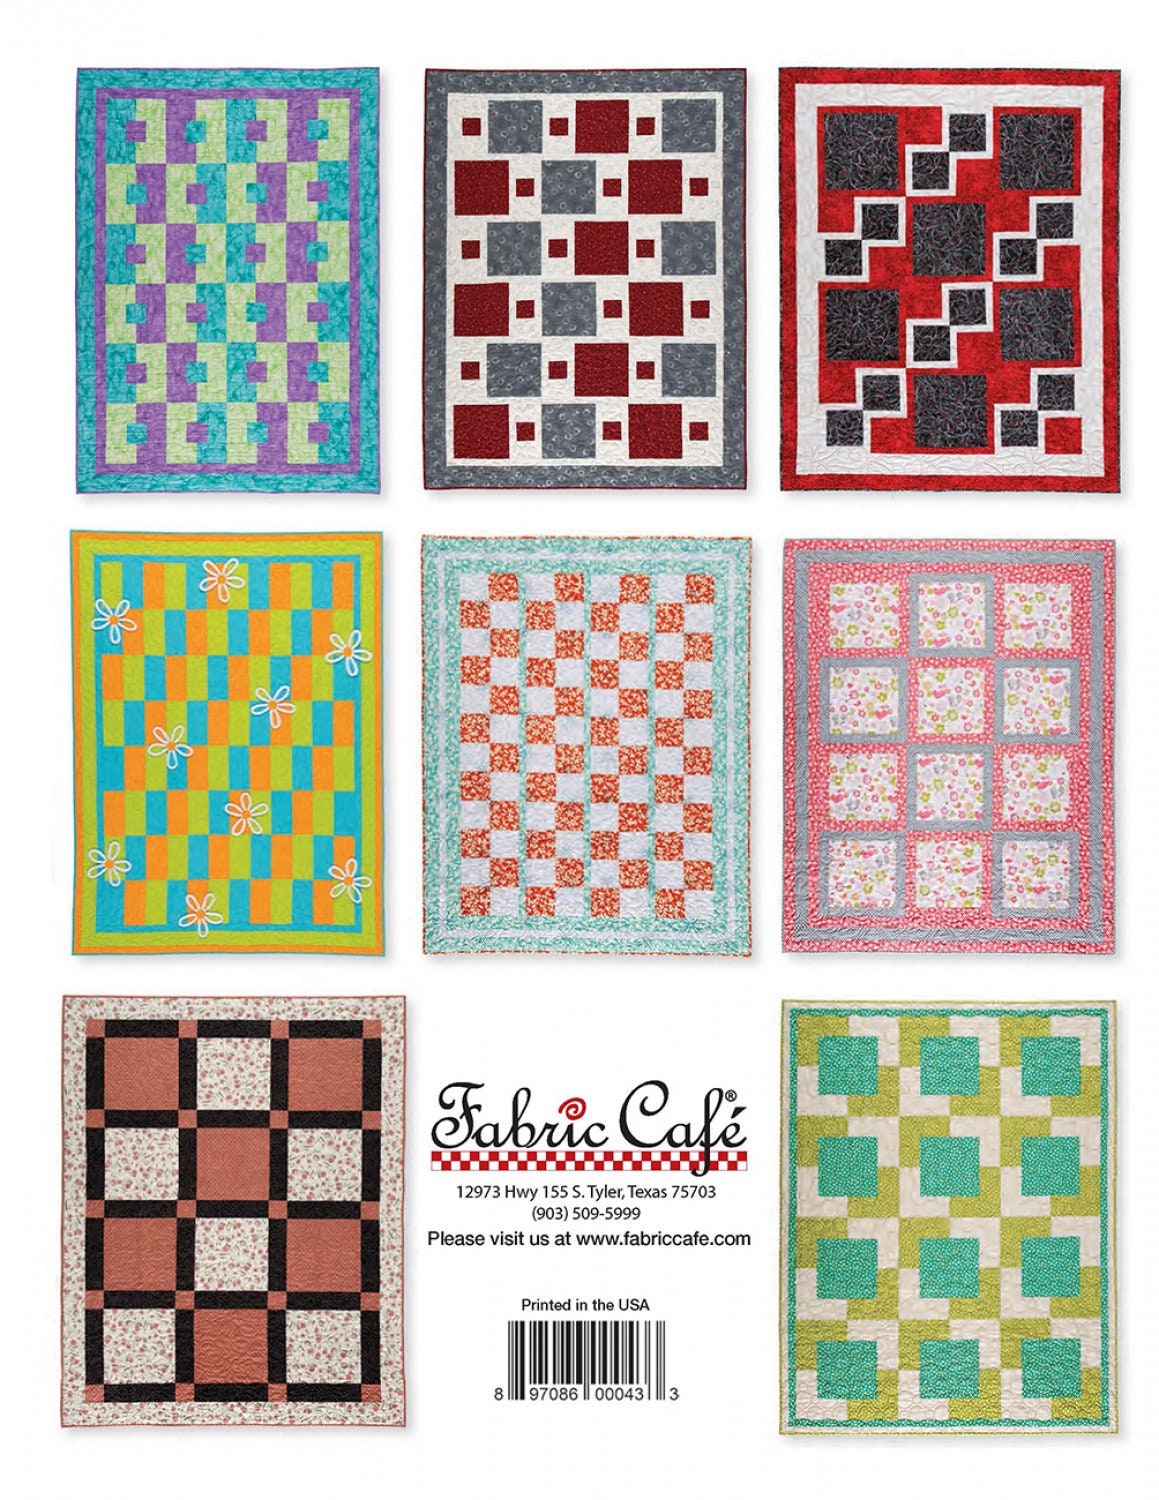 Easy Peasy 3-Yard Quilts Booklet by Fabric Cafe/Donna Robertson